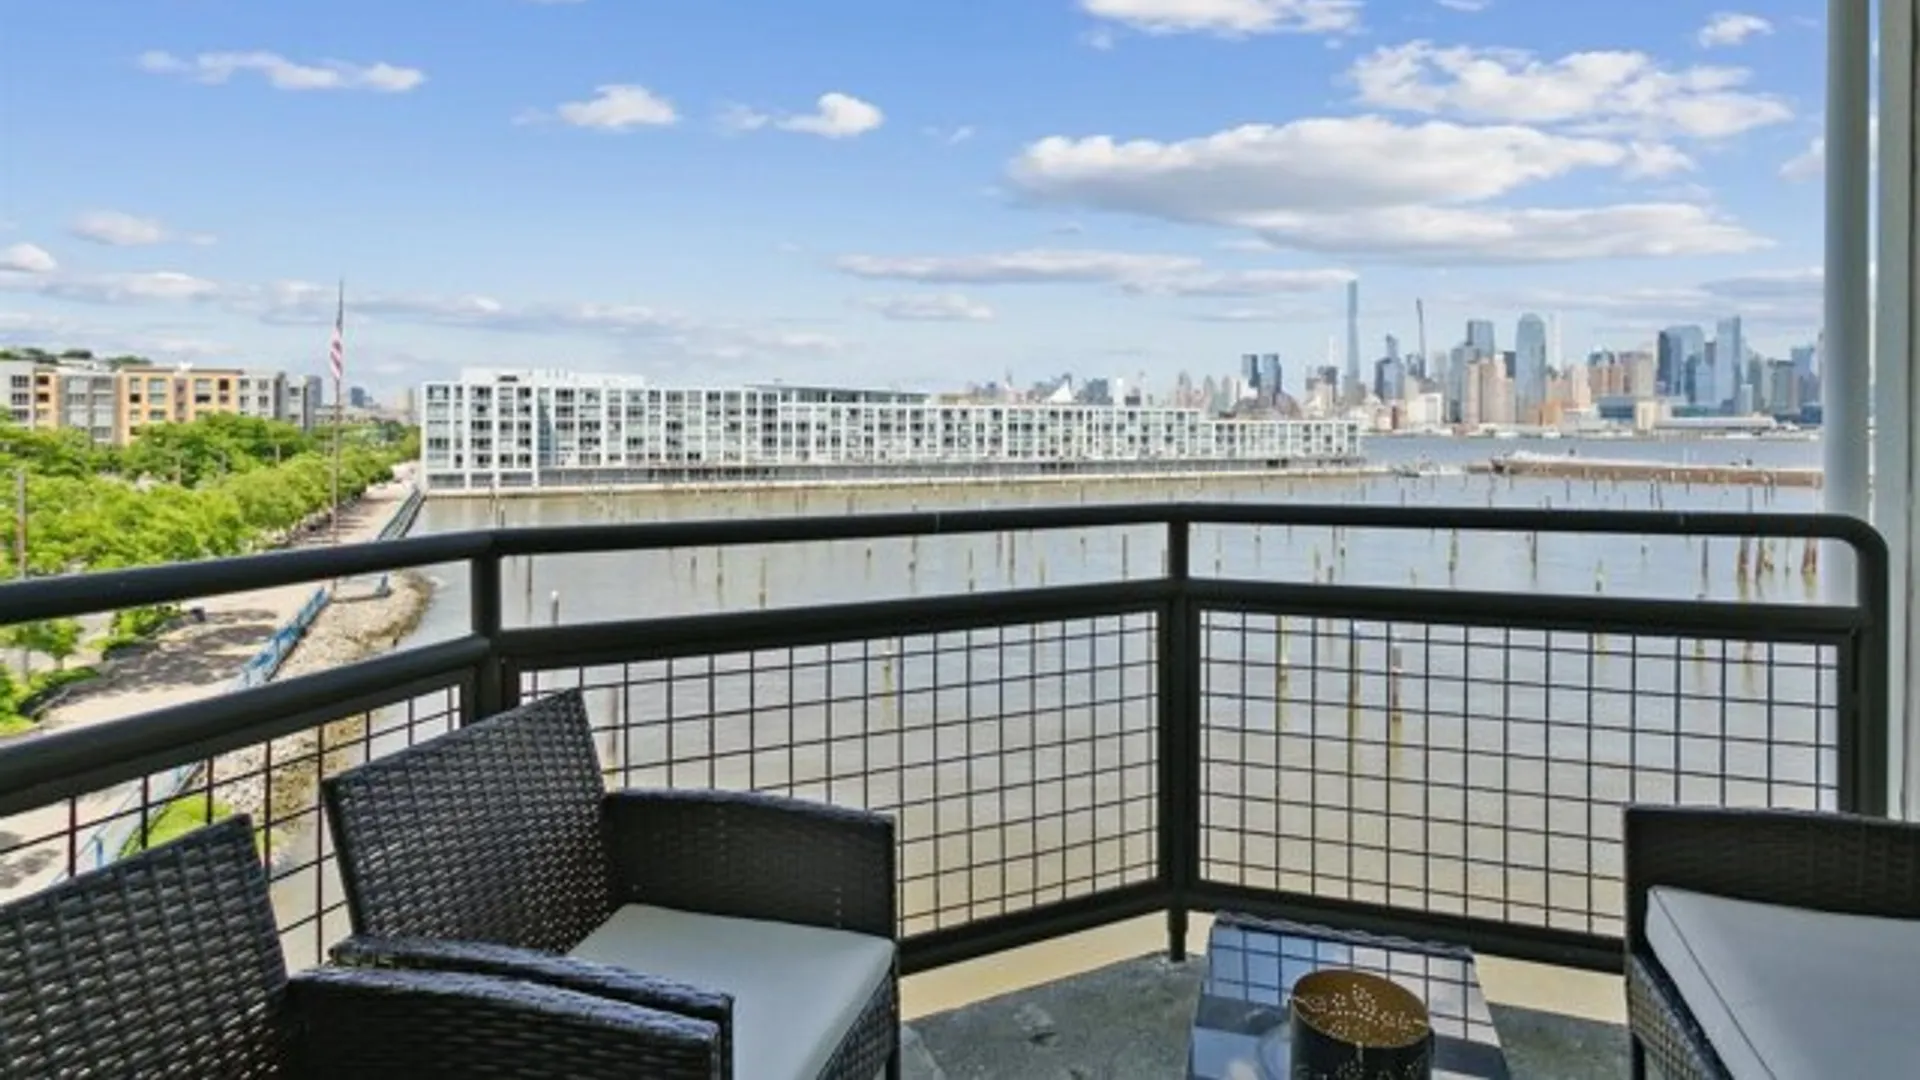 Lincoln Harbor Yacht Club, Hudson River Waterfront Walkway, Weehawken, NJ 07086, USA | 1 bed house for rent